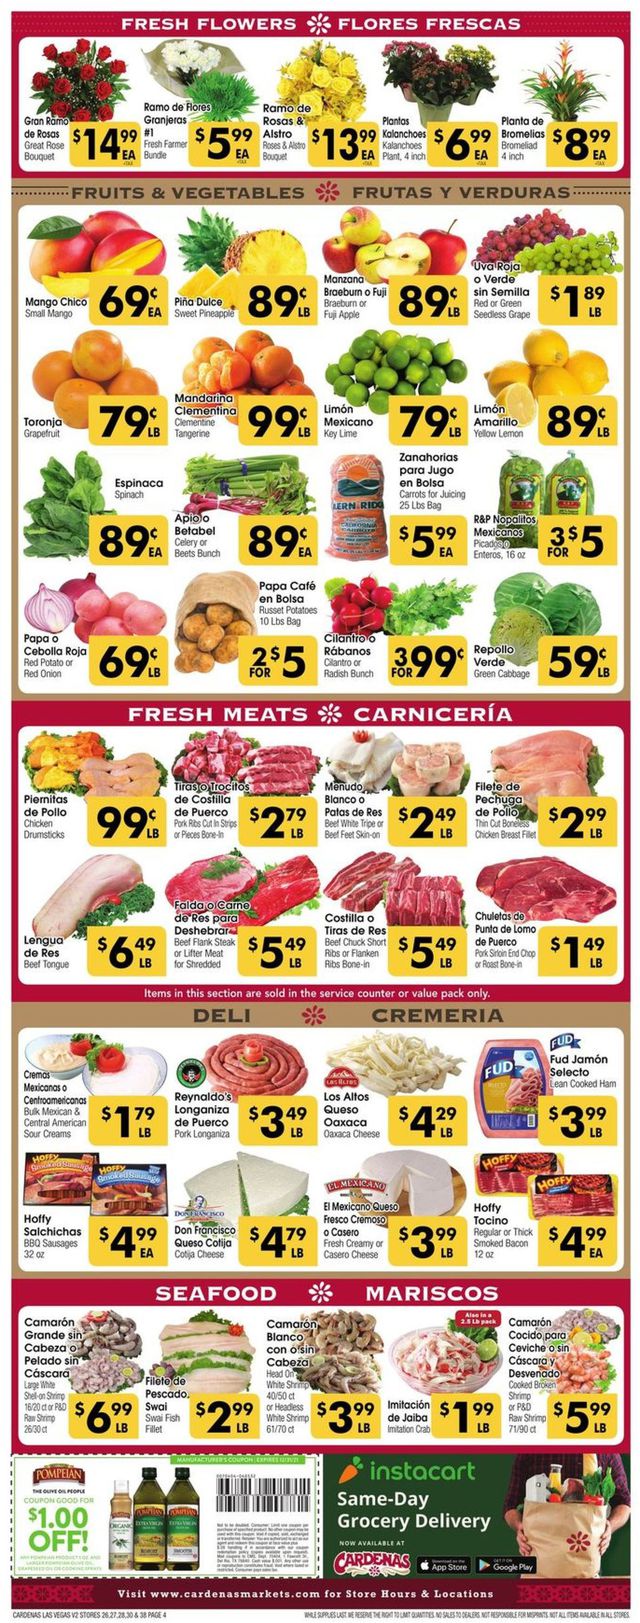 Cardenas Ad from 01/06/2021